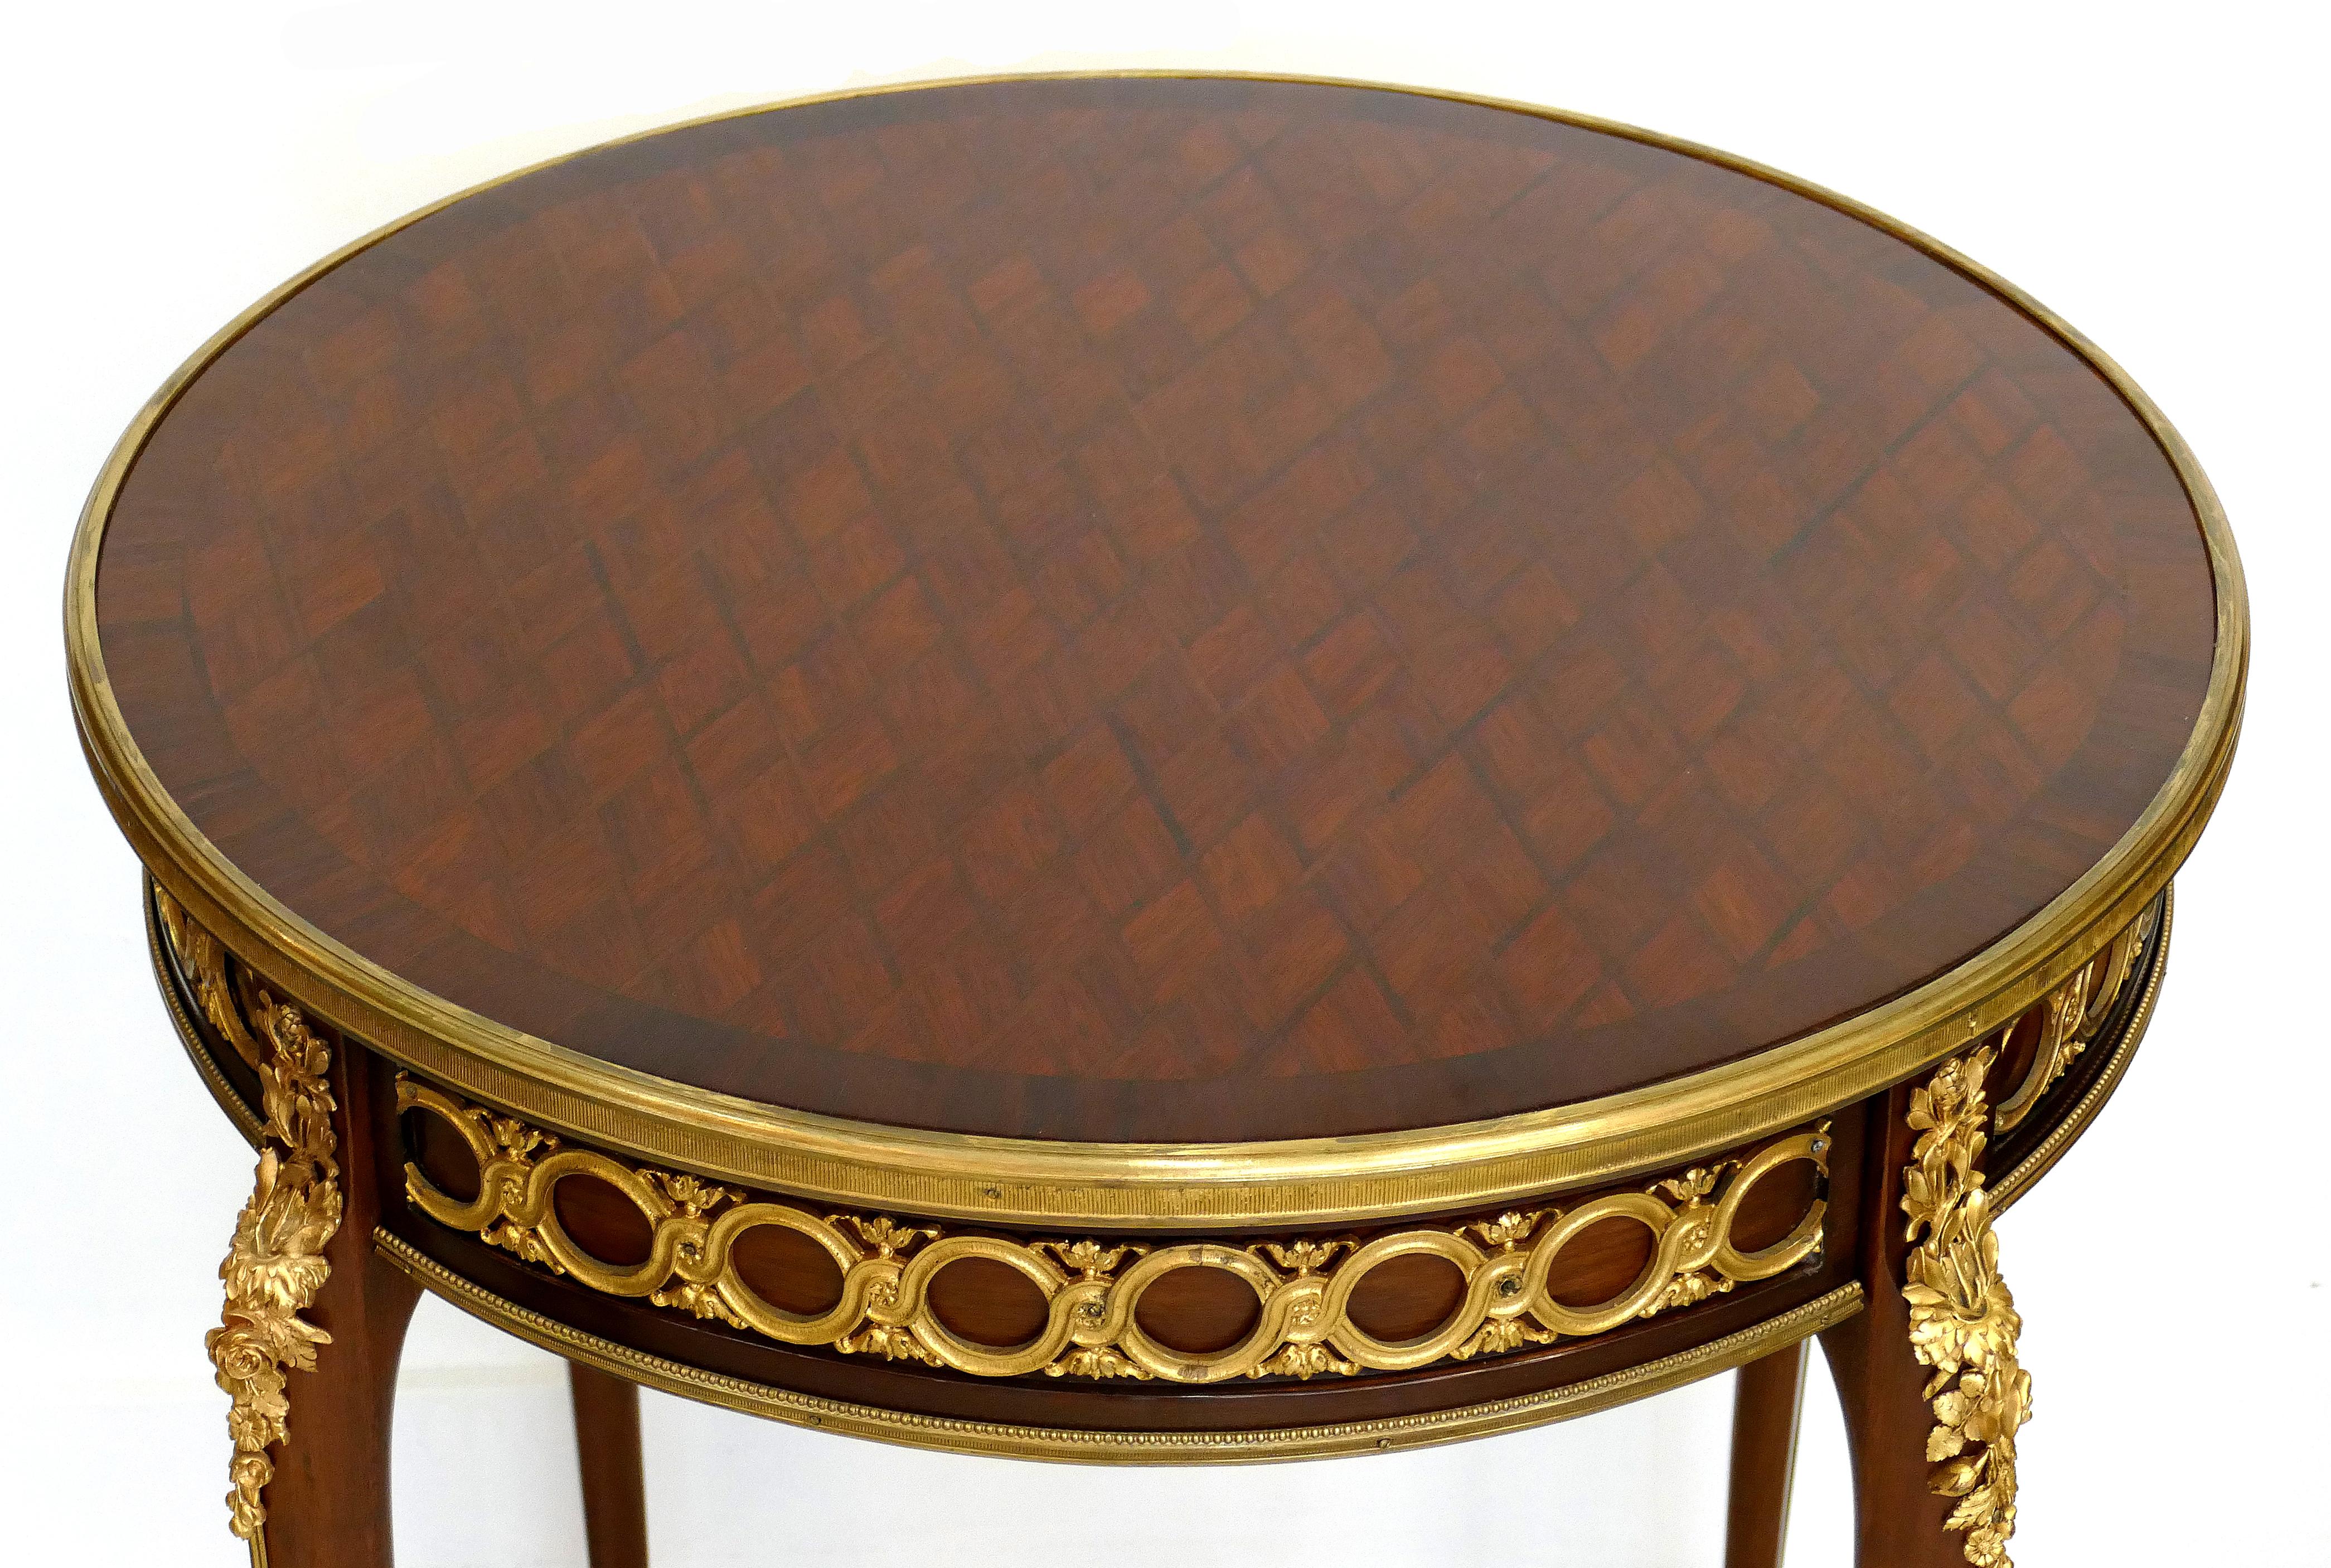 Francois Linke side table with parquetry and gilt bronze mounts

Offered for sale is a Francois Linke (1855-1946) gueridon with gilt bronze mounts and a parquetry top. This side table is in the style of Louis XV and was created during the early